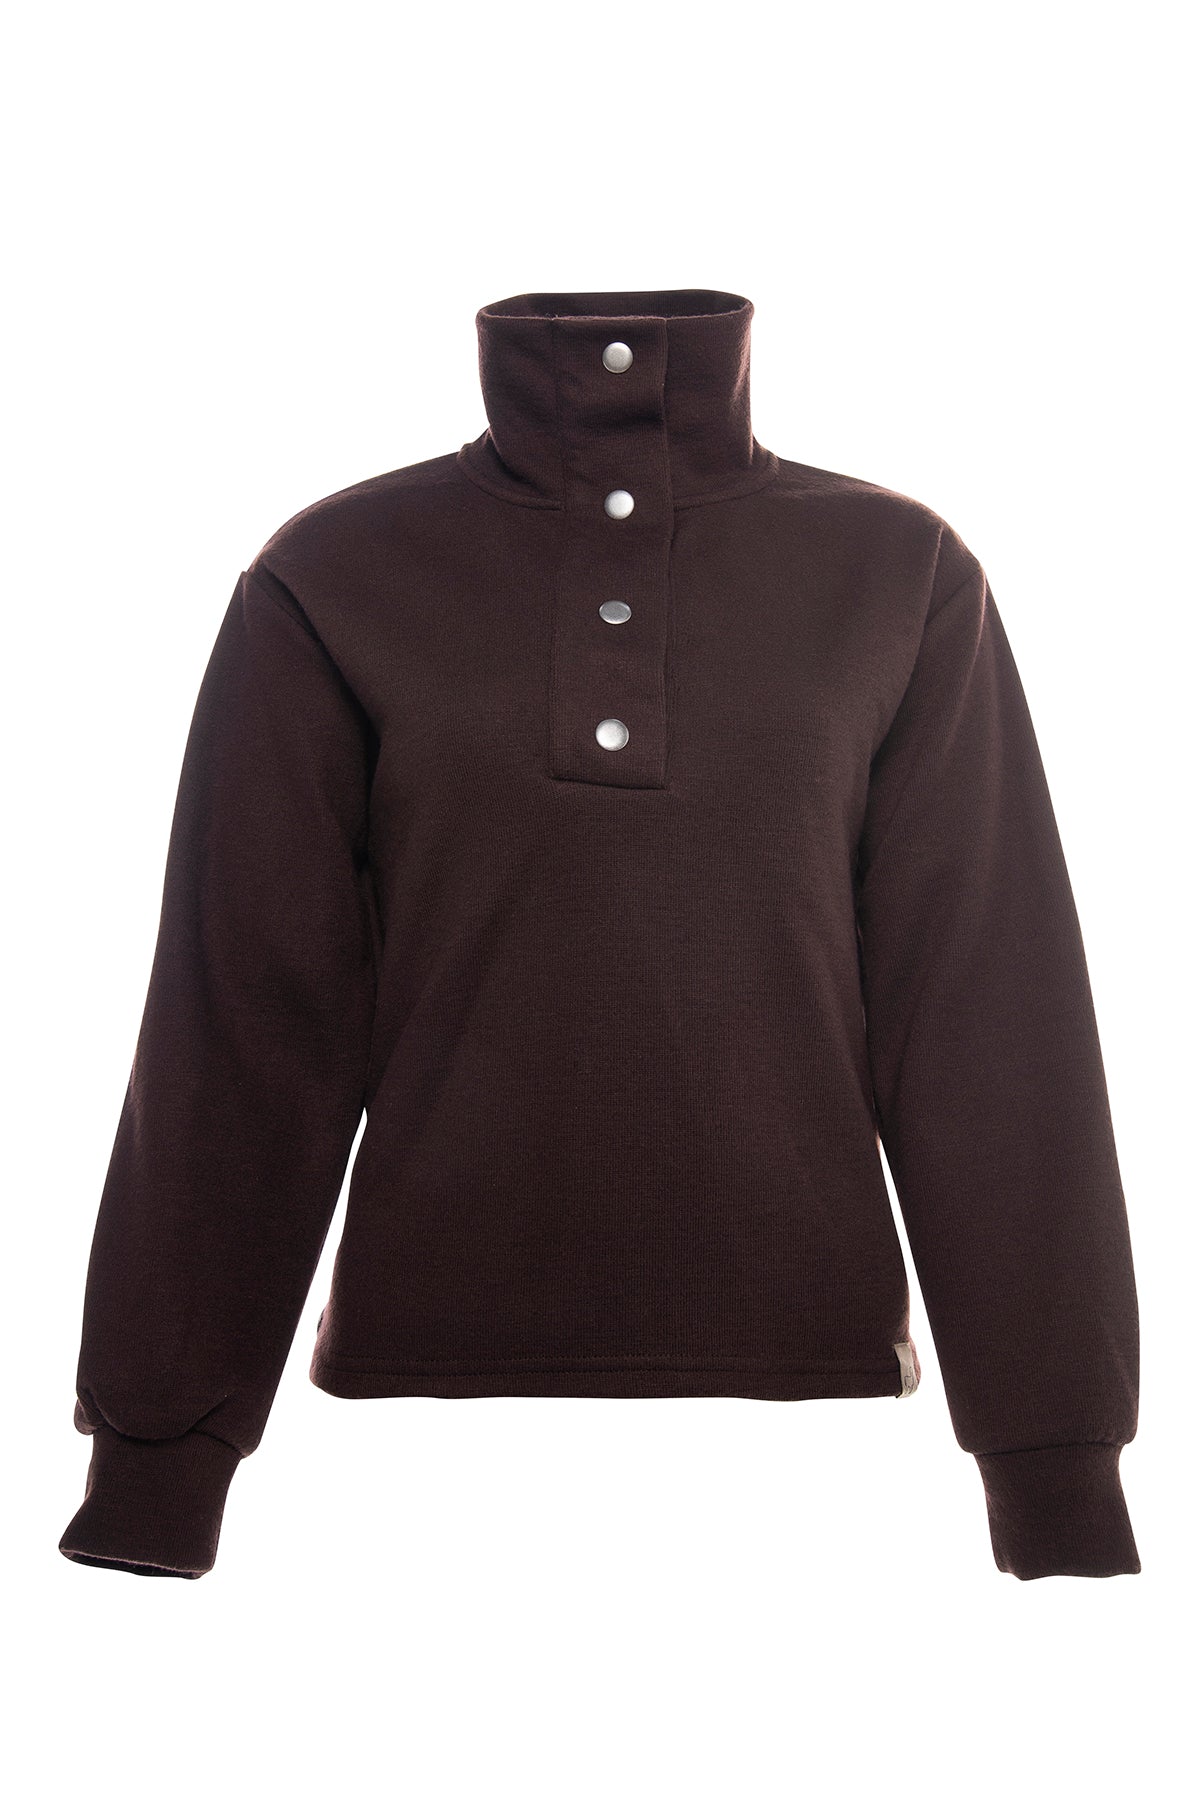 High neck buttoned sweater with side buttons in brown.